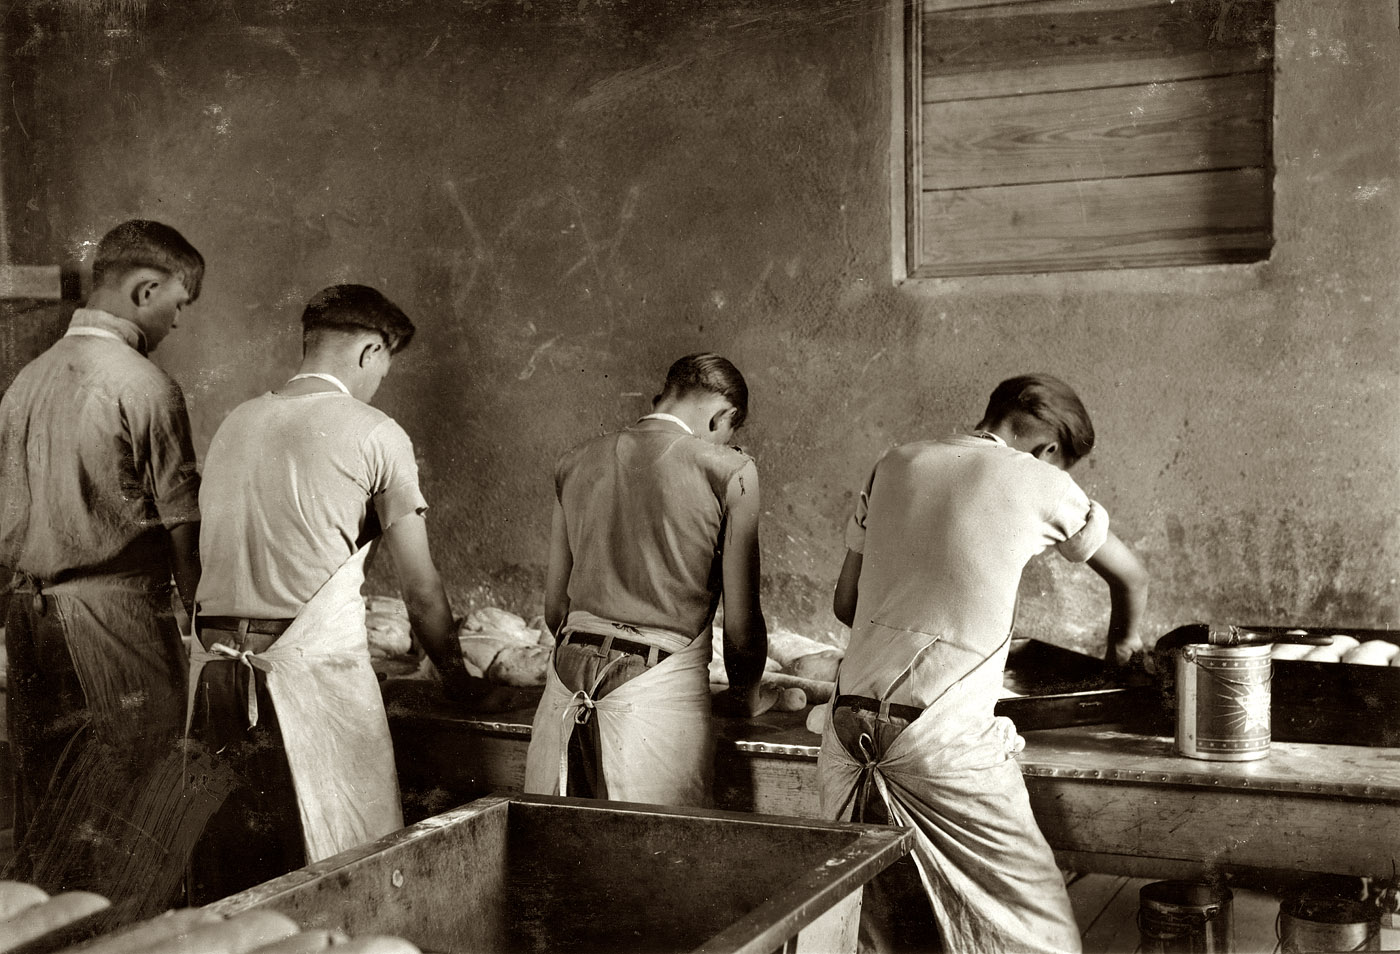 April 1917. "Making bread. Pauls Valley Training School. Pauls Valley, Oklahoma." View full size. Photograph by Lewis Wickes Hine.